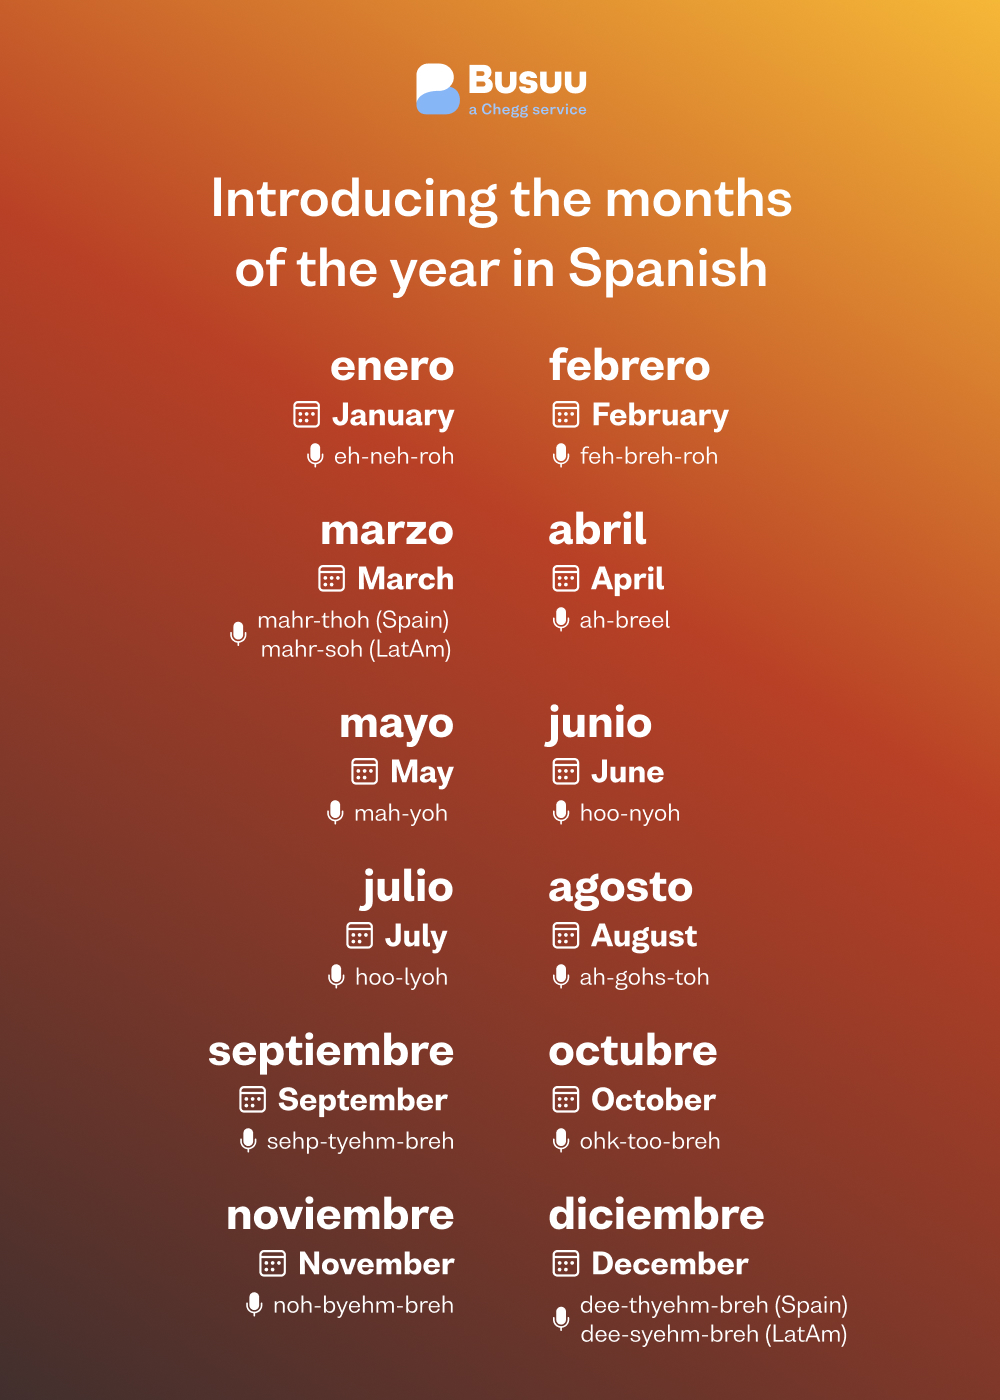 learn-the-months-of-the-year-in-spanish-busuu